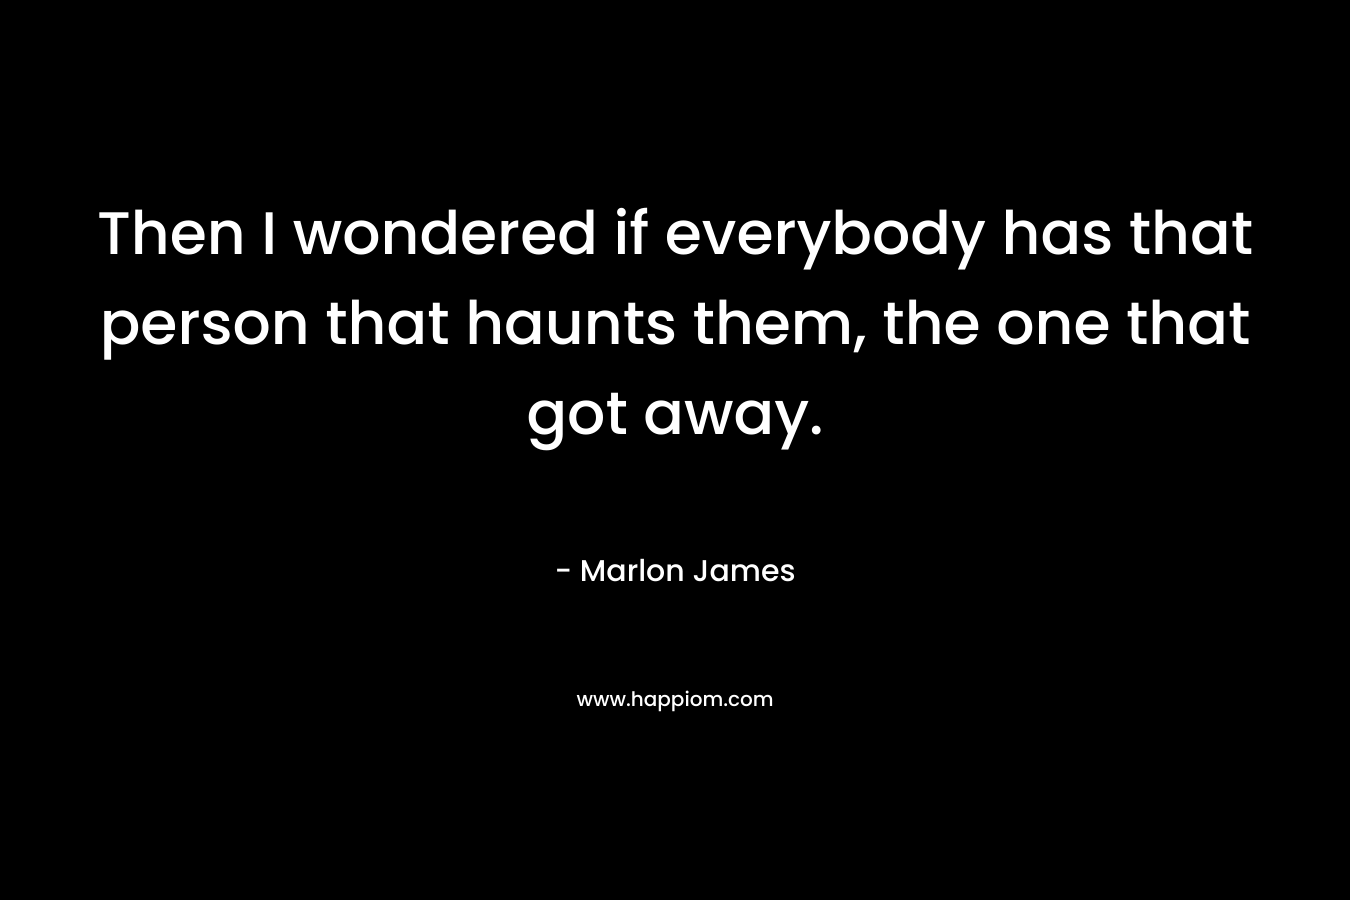 Then I wondered if everybody has that person that haunts them, the one that got away. – Marlon James